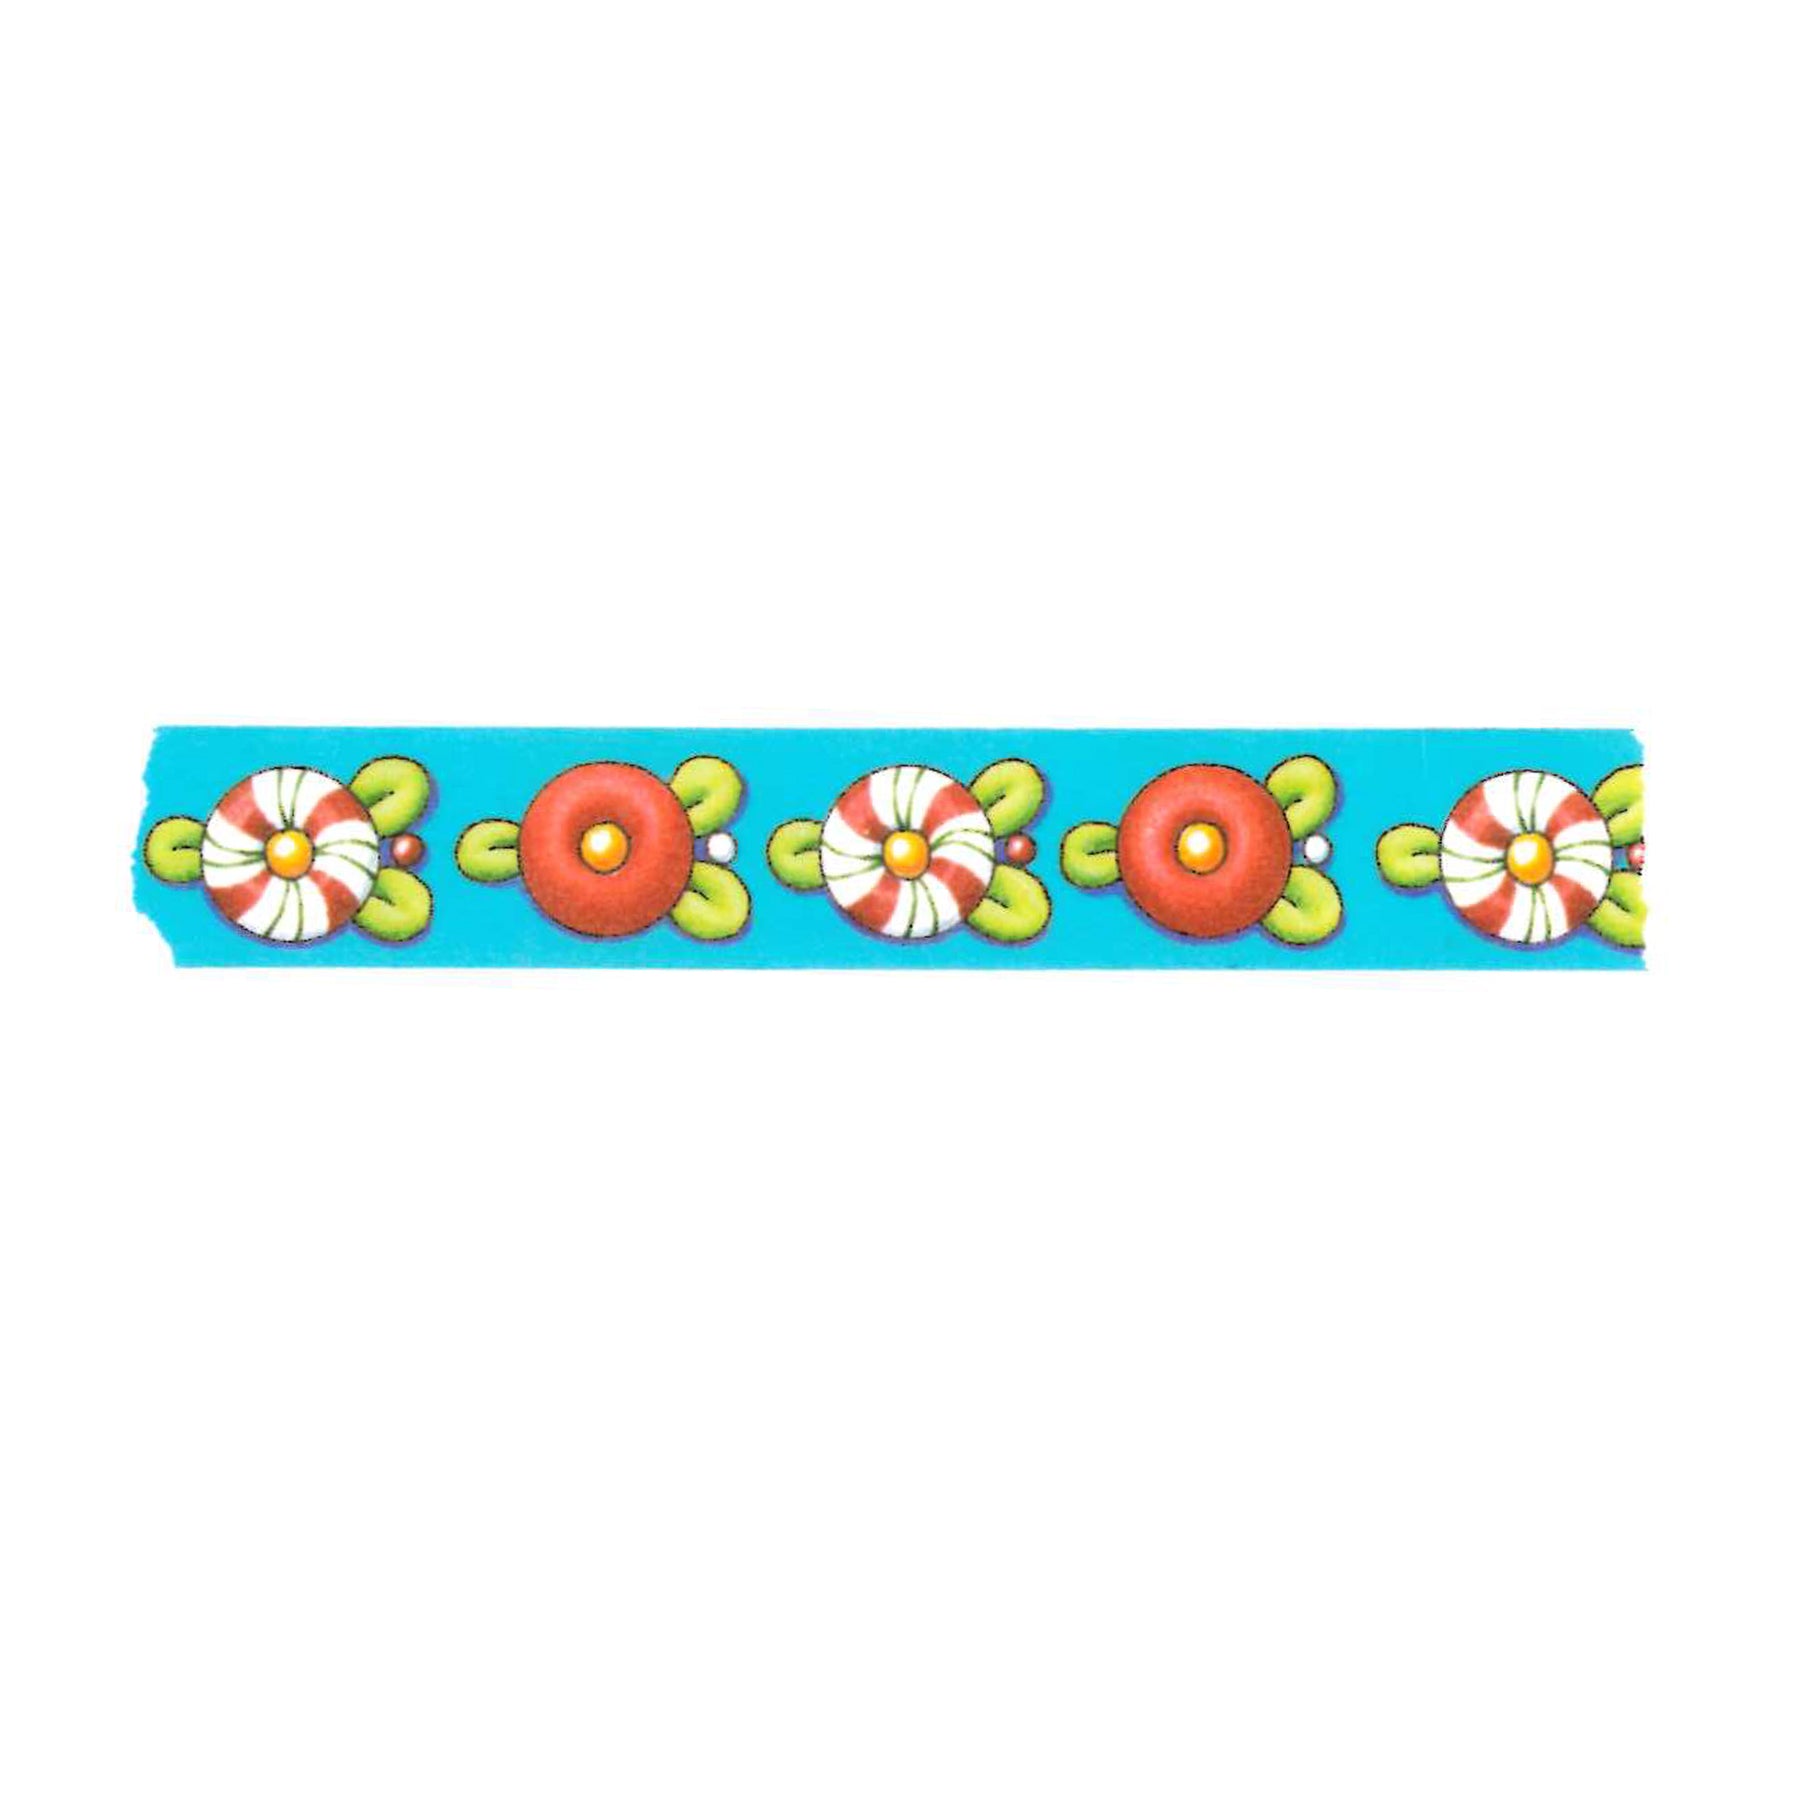 Peppermint Candy Blue Washi Tape